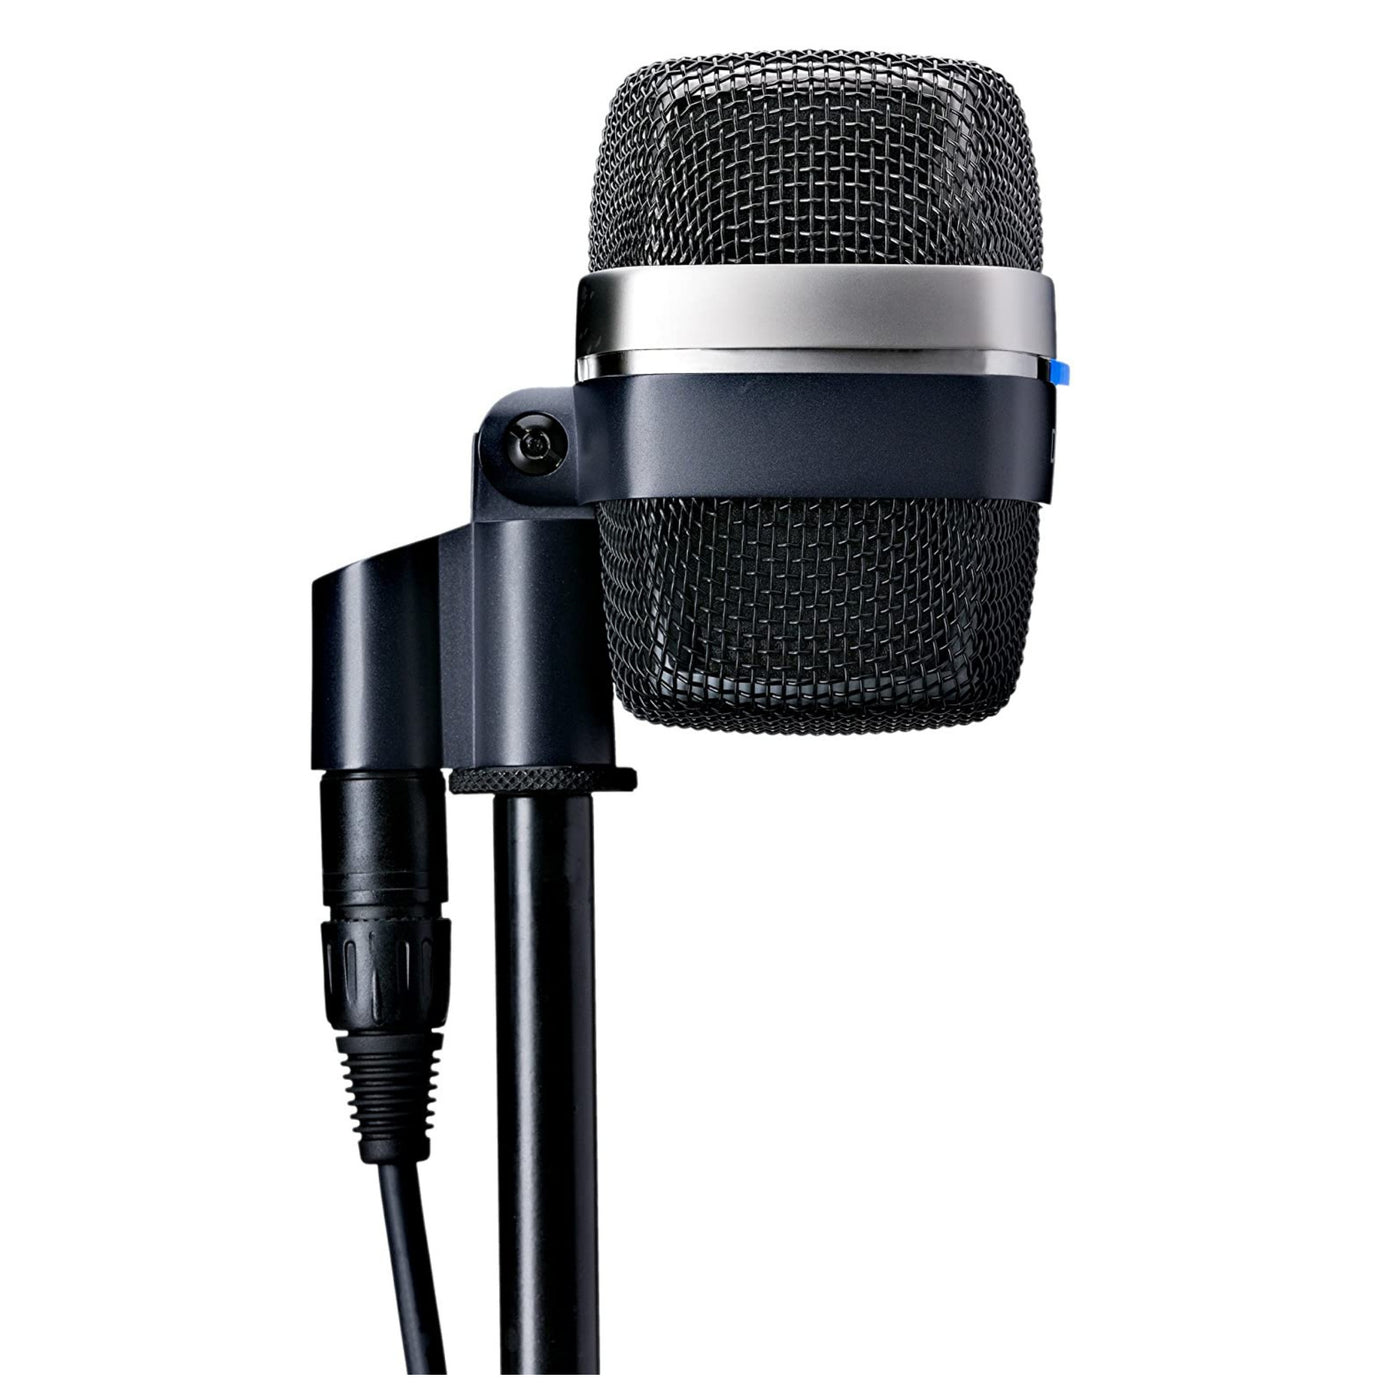 D12 VR Reference Large-Diaphragm Dynamic Microphone